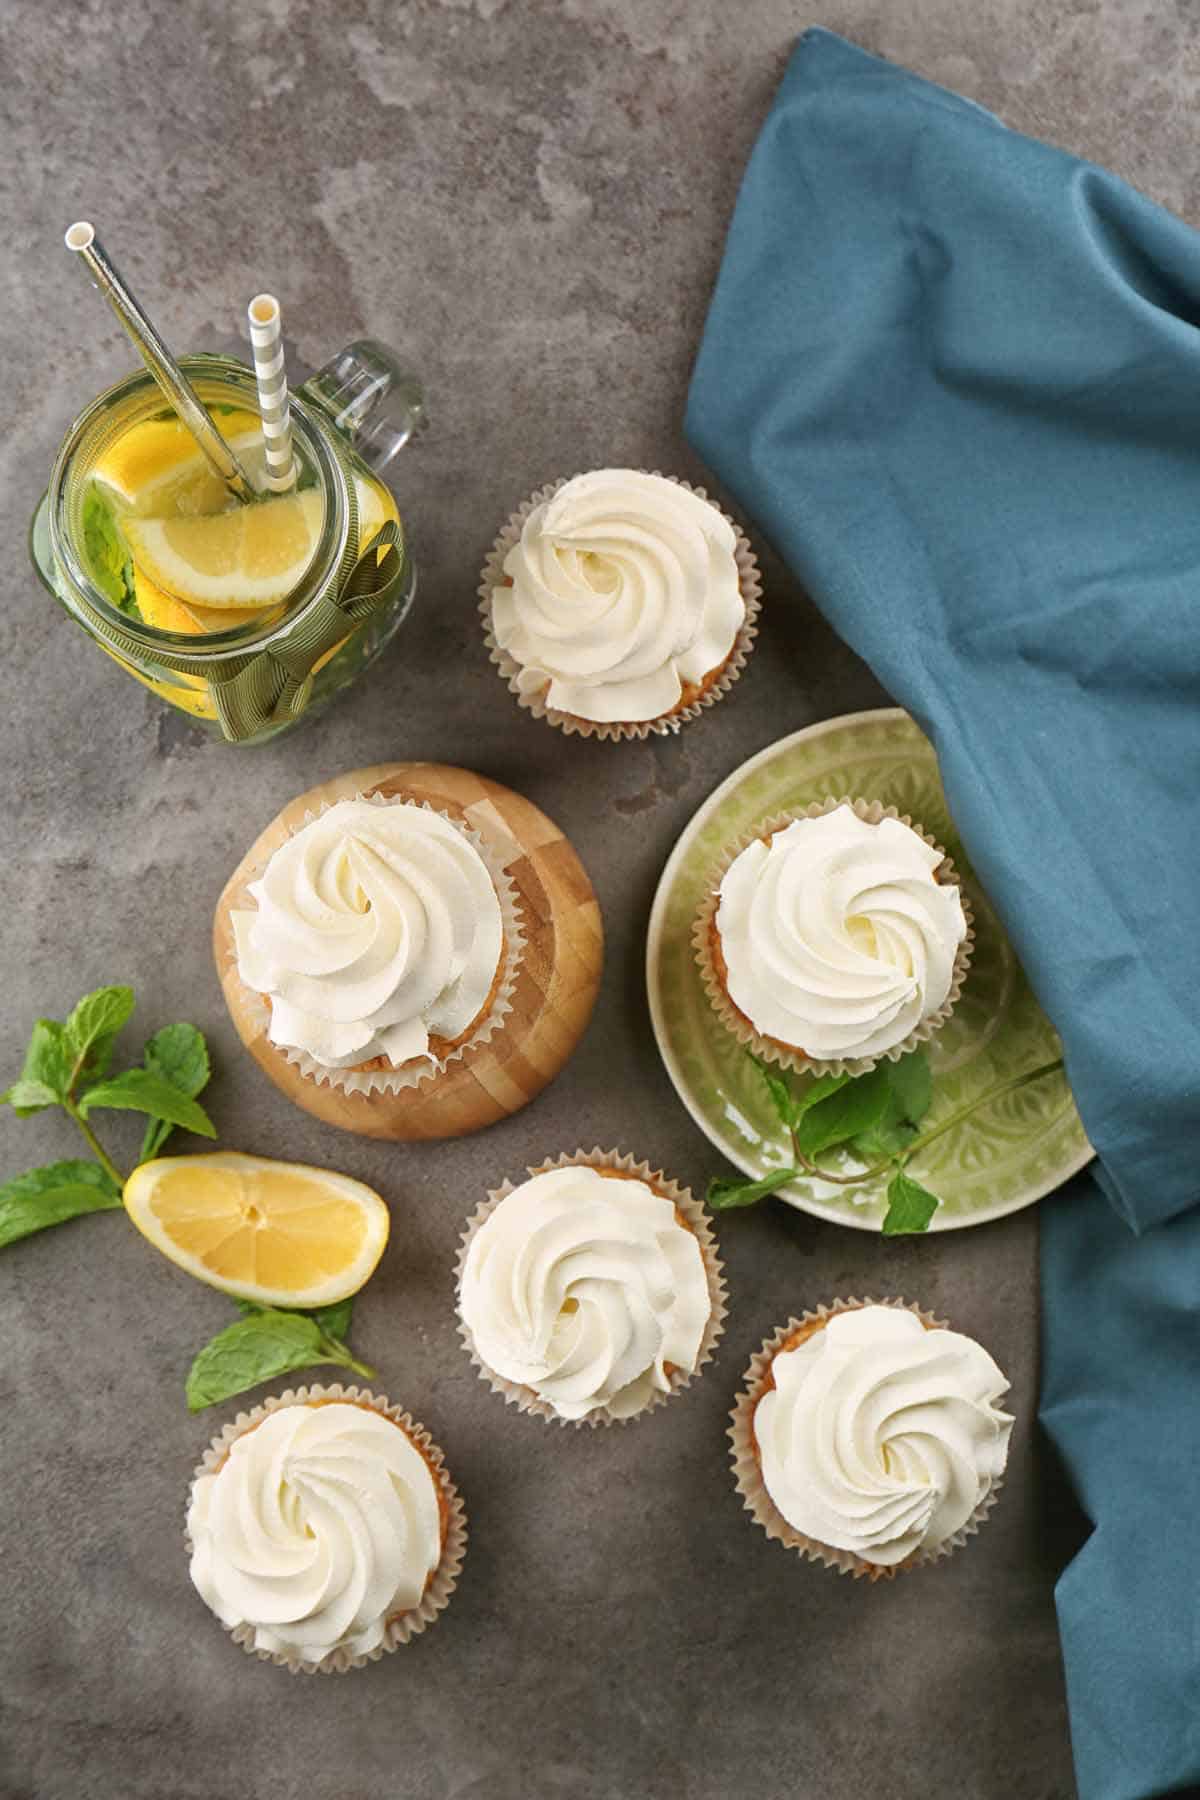 Lemon cupcakes filled and decorated with pastry cream.